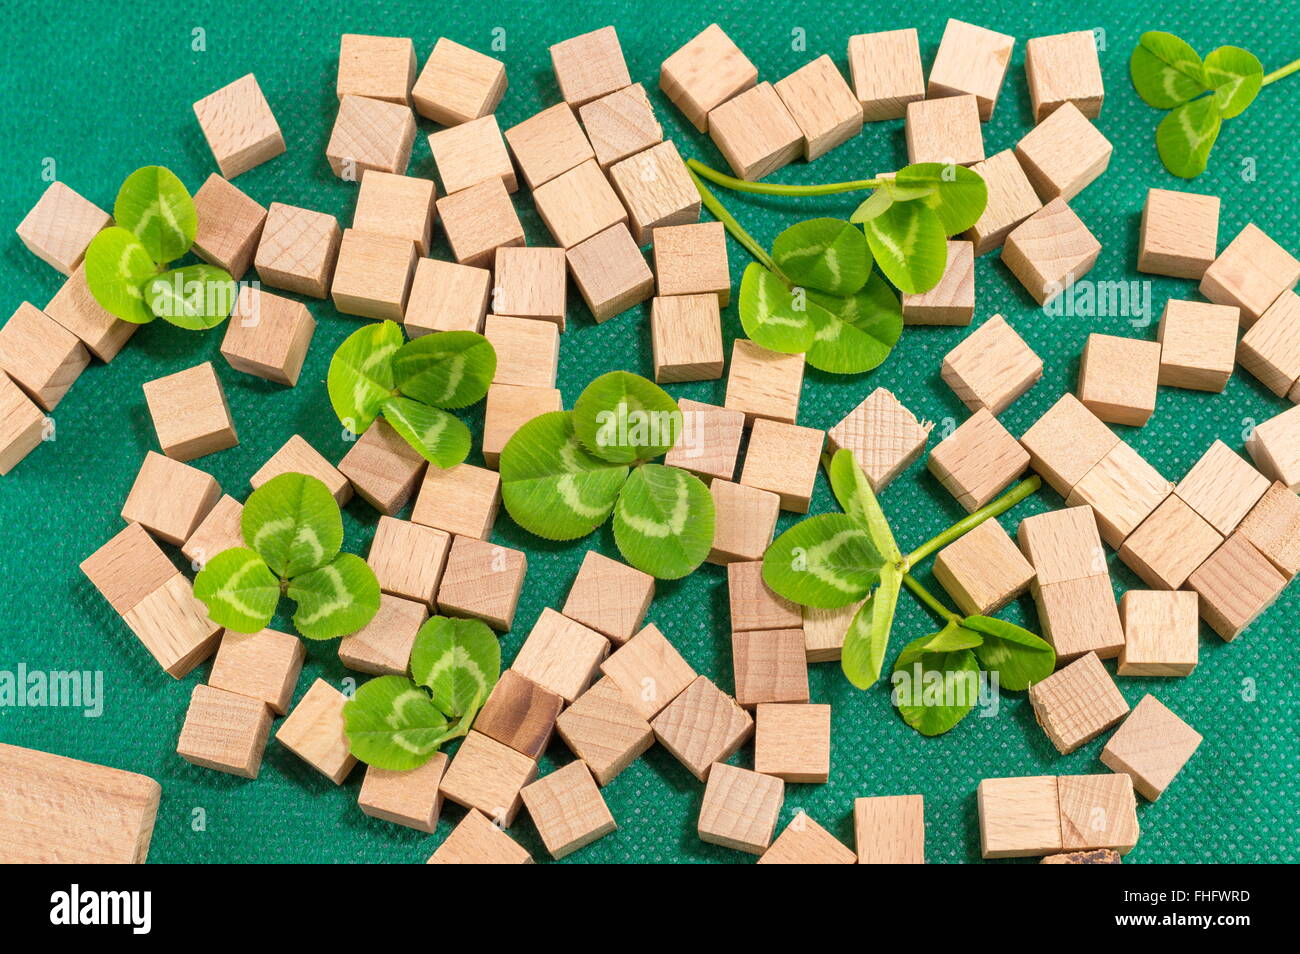 St. Patrick decoration with clover and small wooden cubes Stock Photo